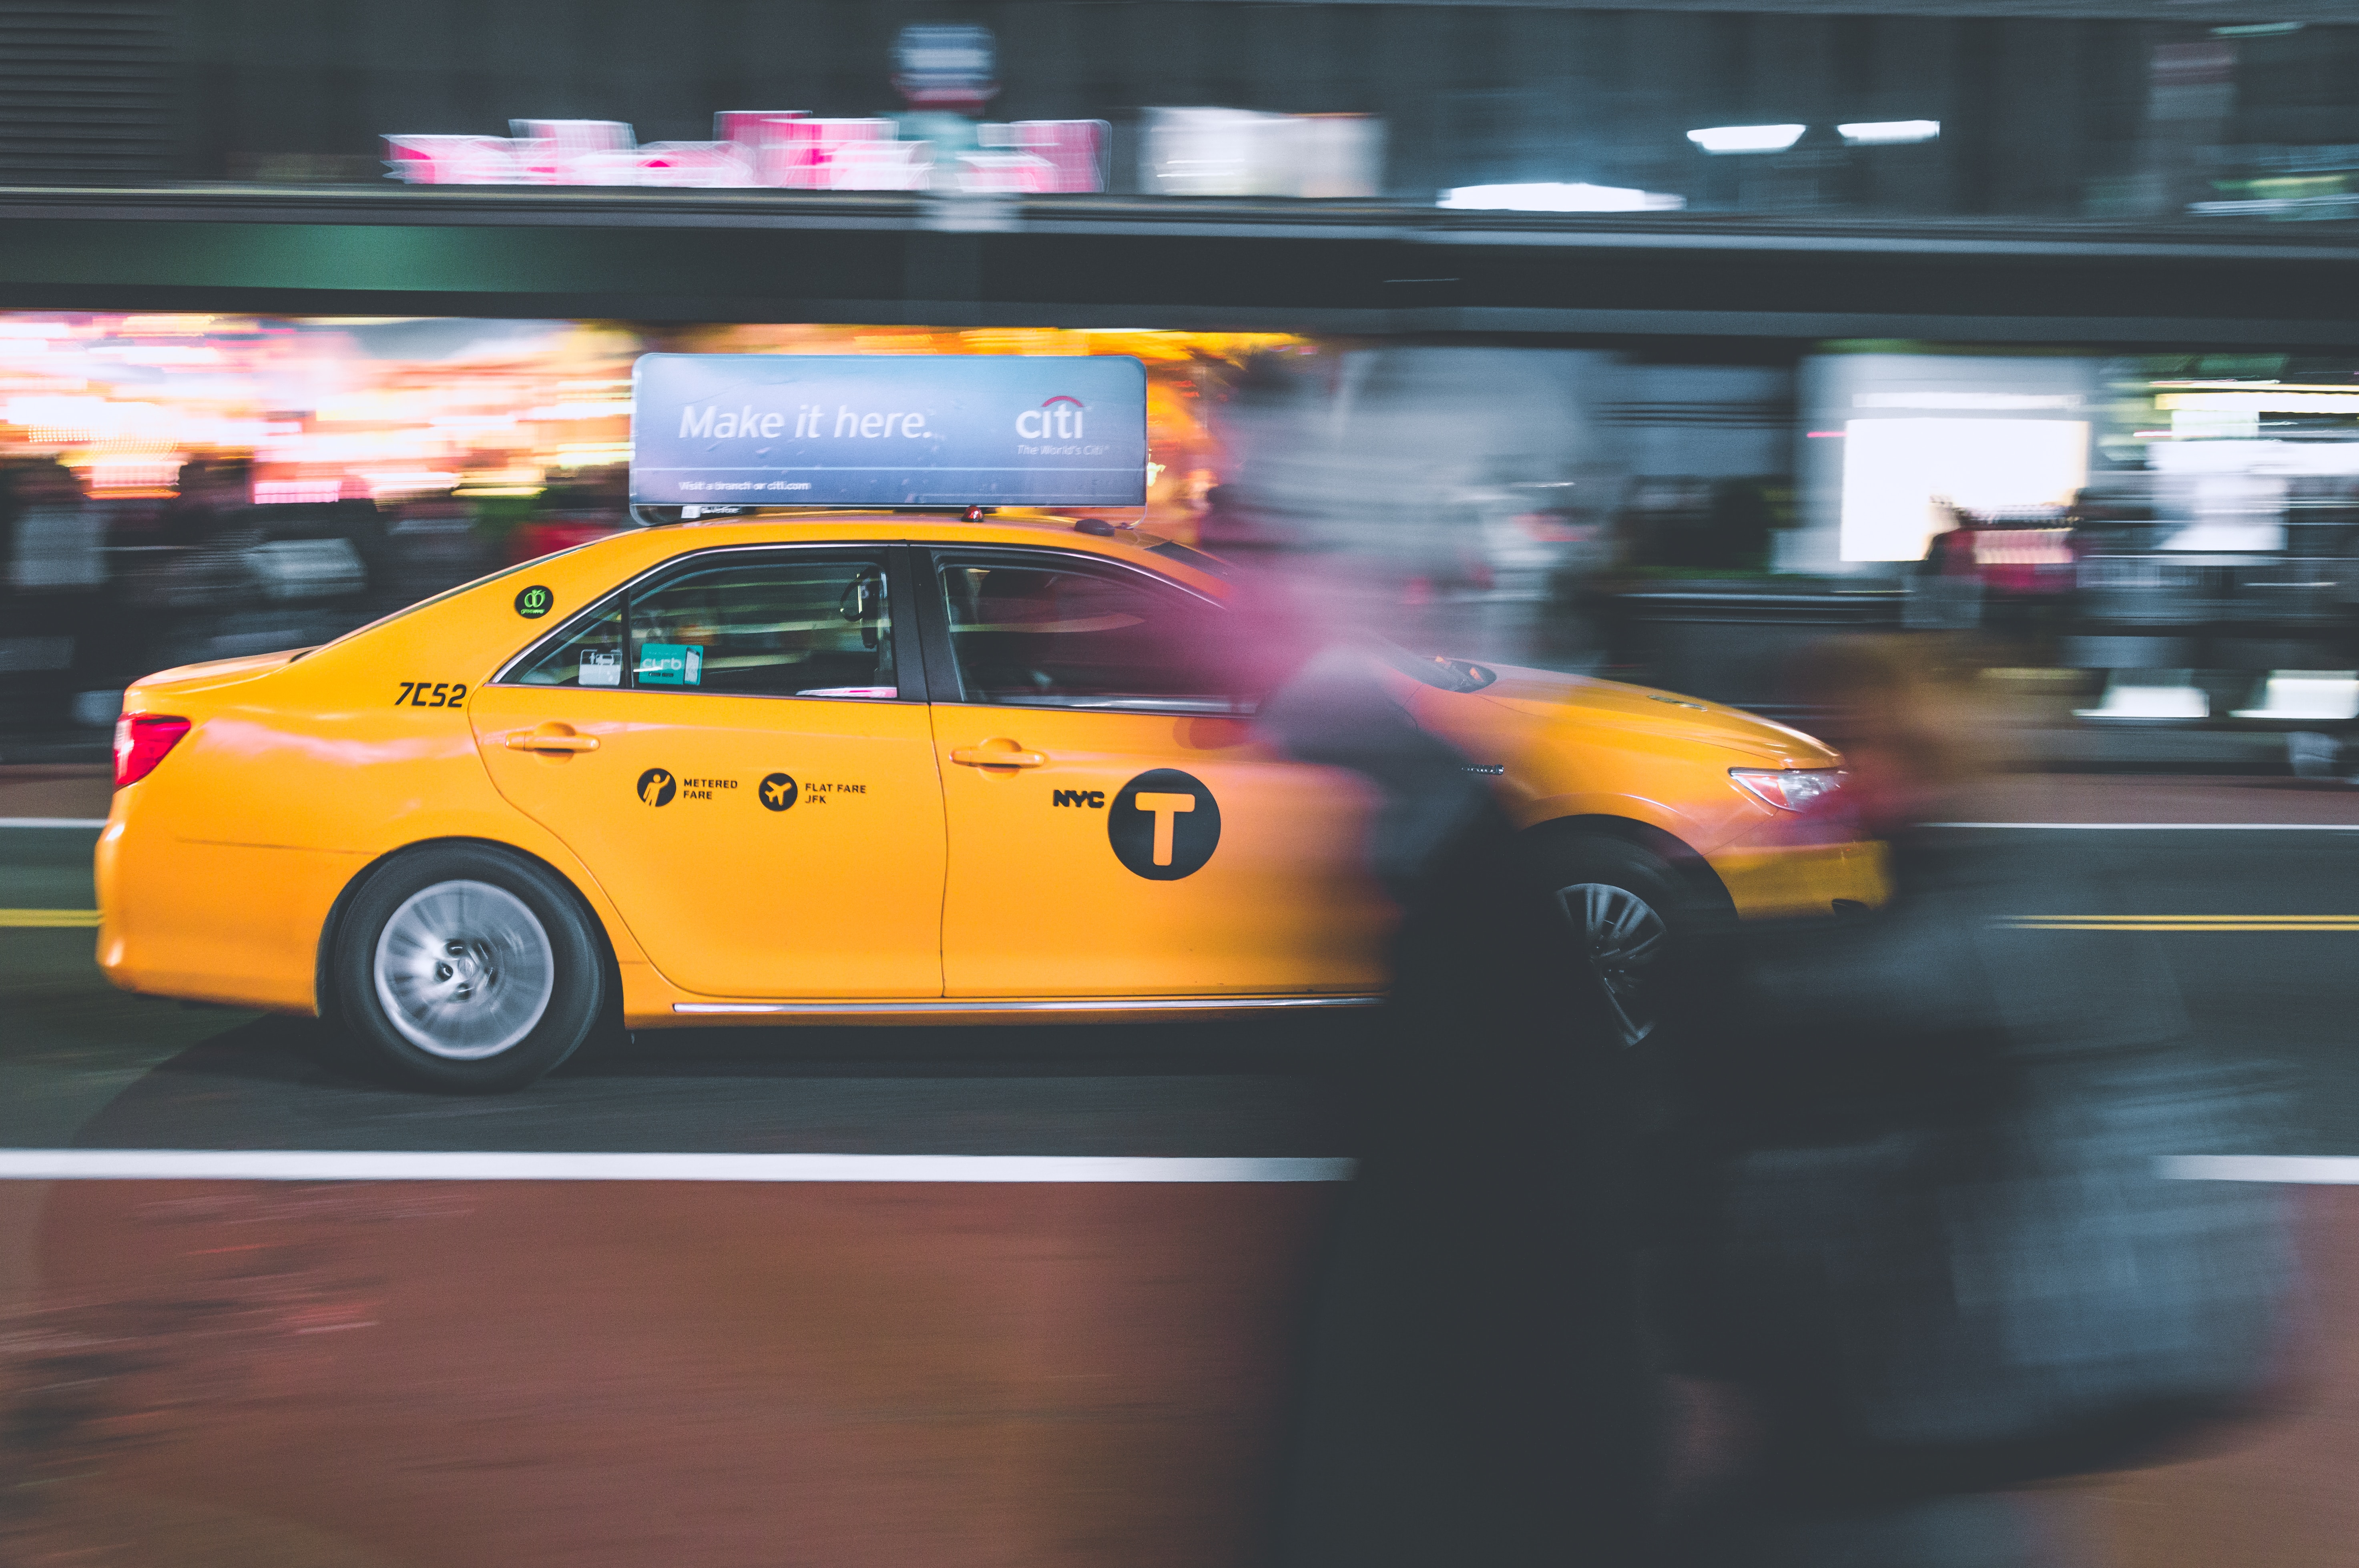 10 things about a Self-Driving Taxi